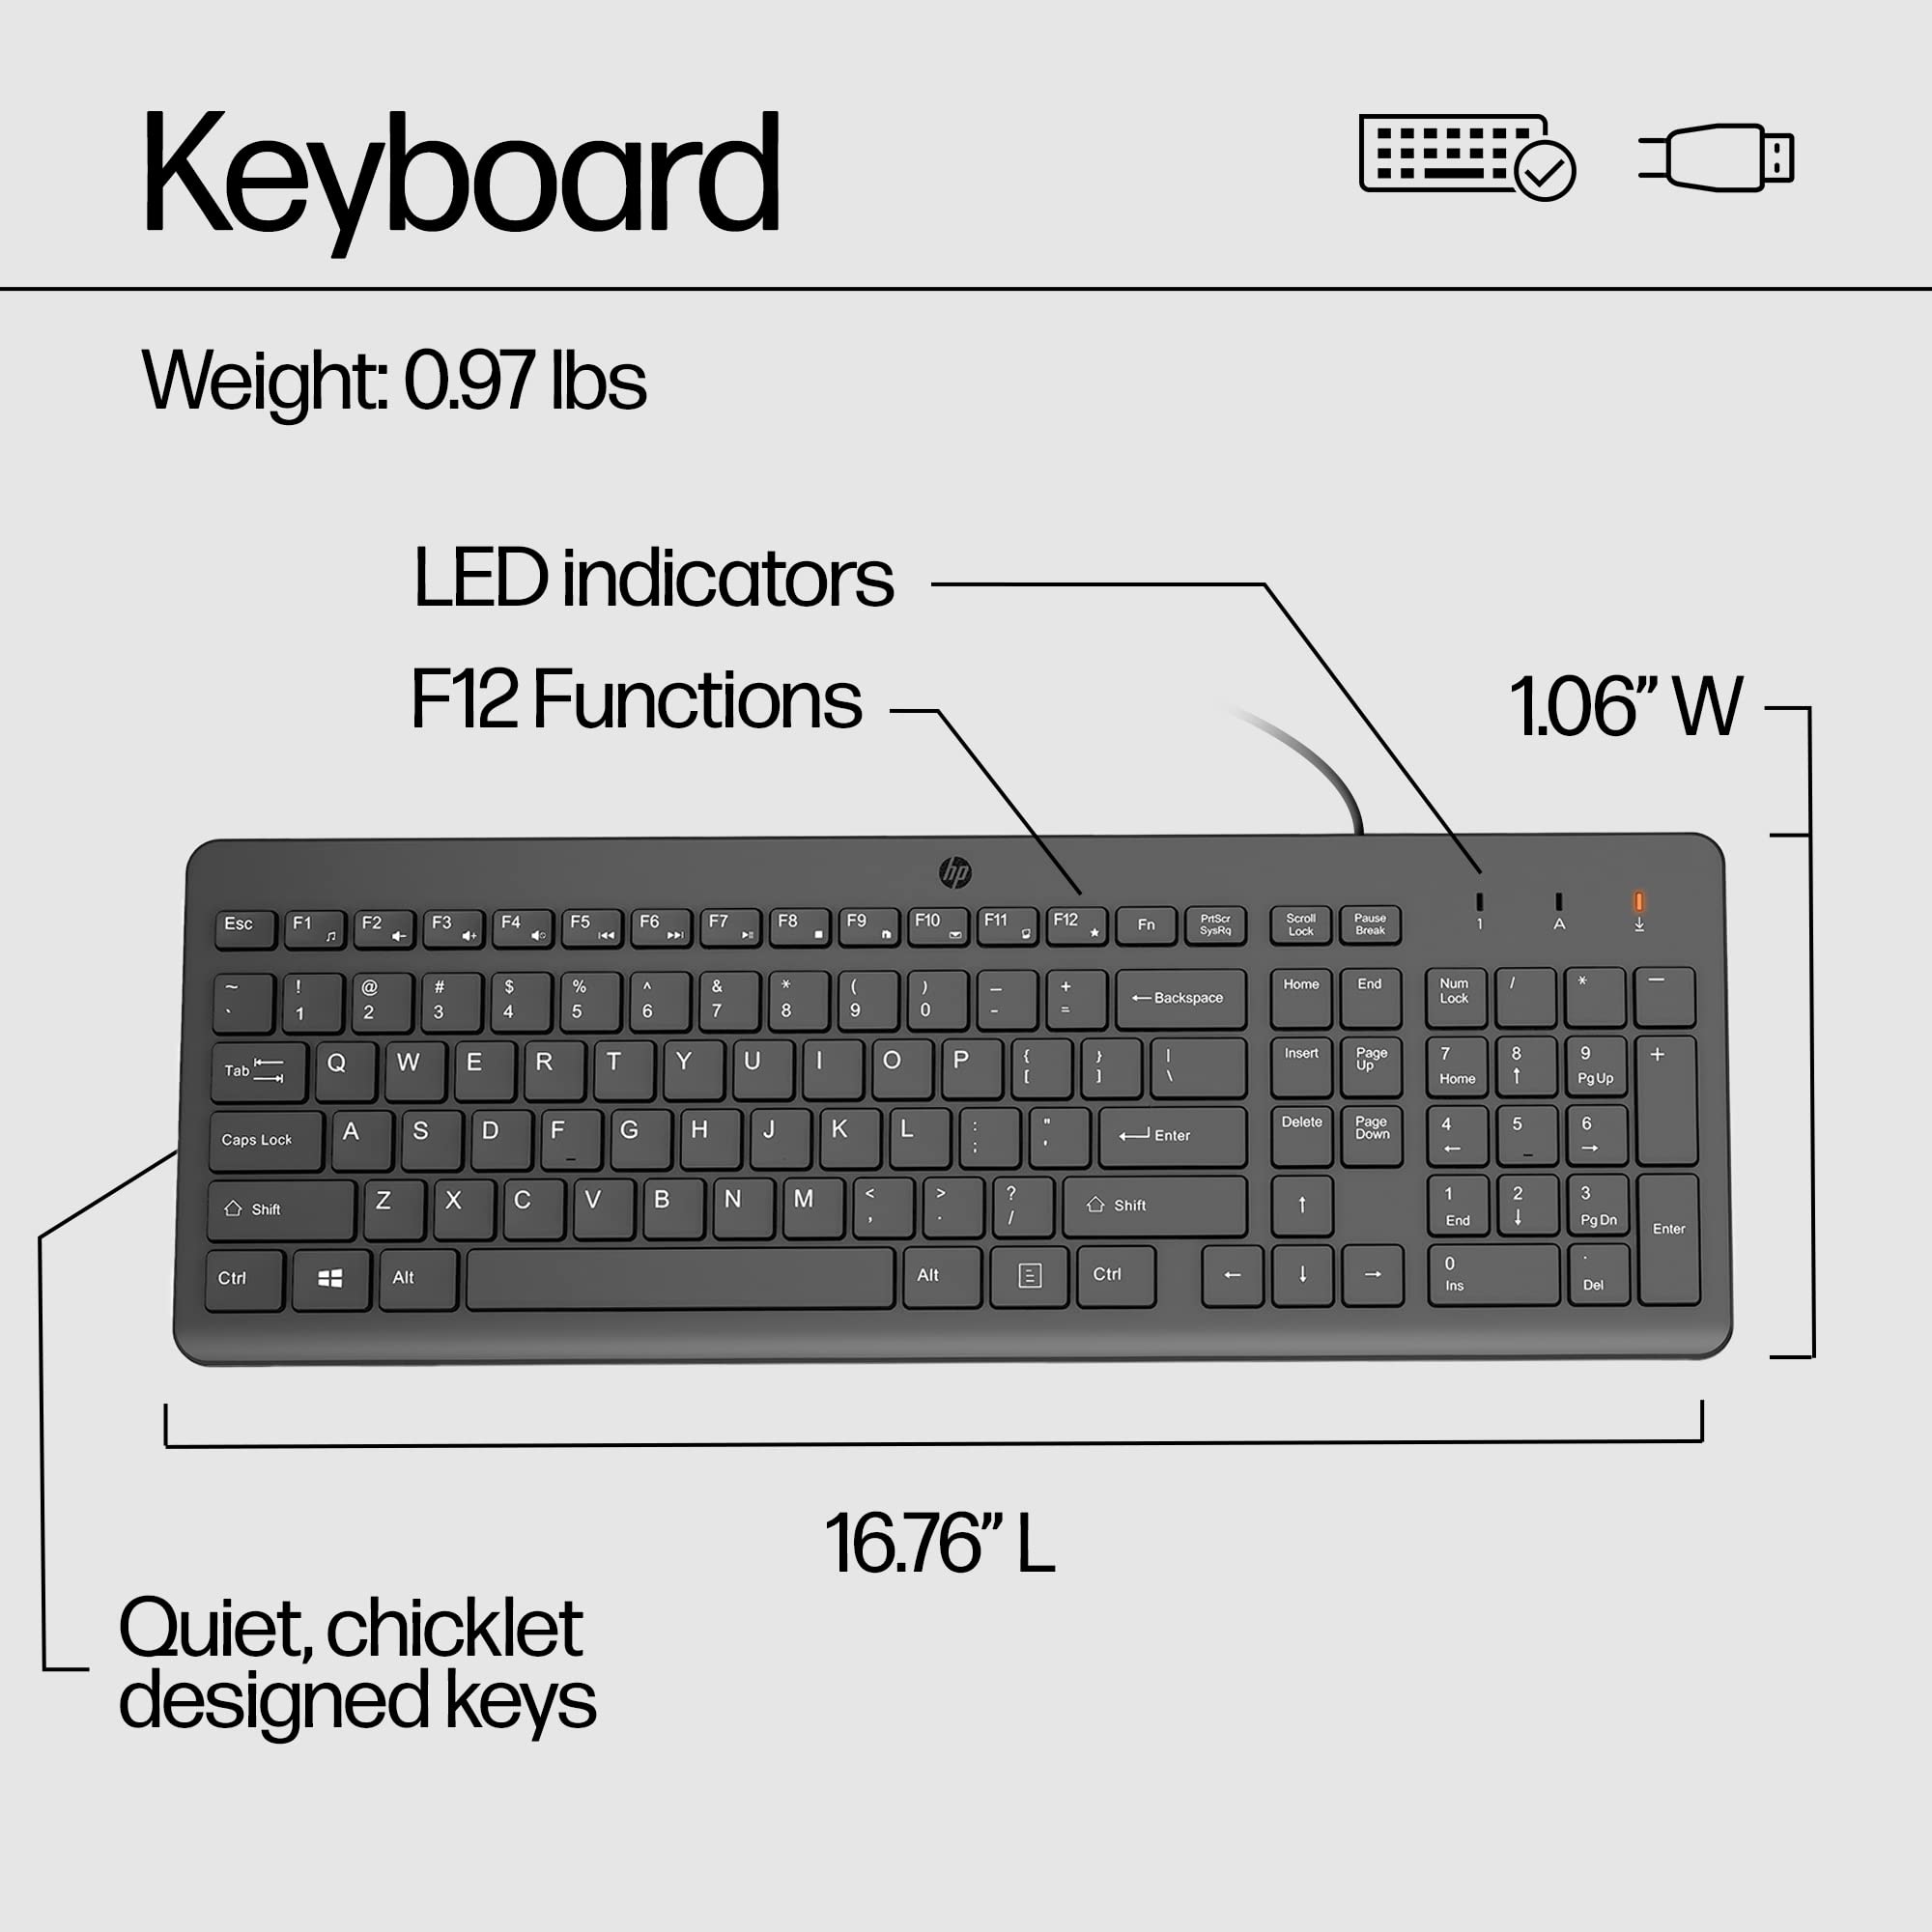 HP 150 Wired Mouse and Keyboard Combo - Full-Sized, Low-Profile Keyboard with Numeric Keypad - 1600 DPI Optical Sensor, Multi-Surface Wired Mouse - USB Plug-and-Play Connectivity (240J7AA, Black)